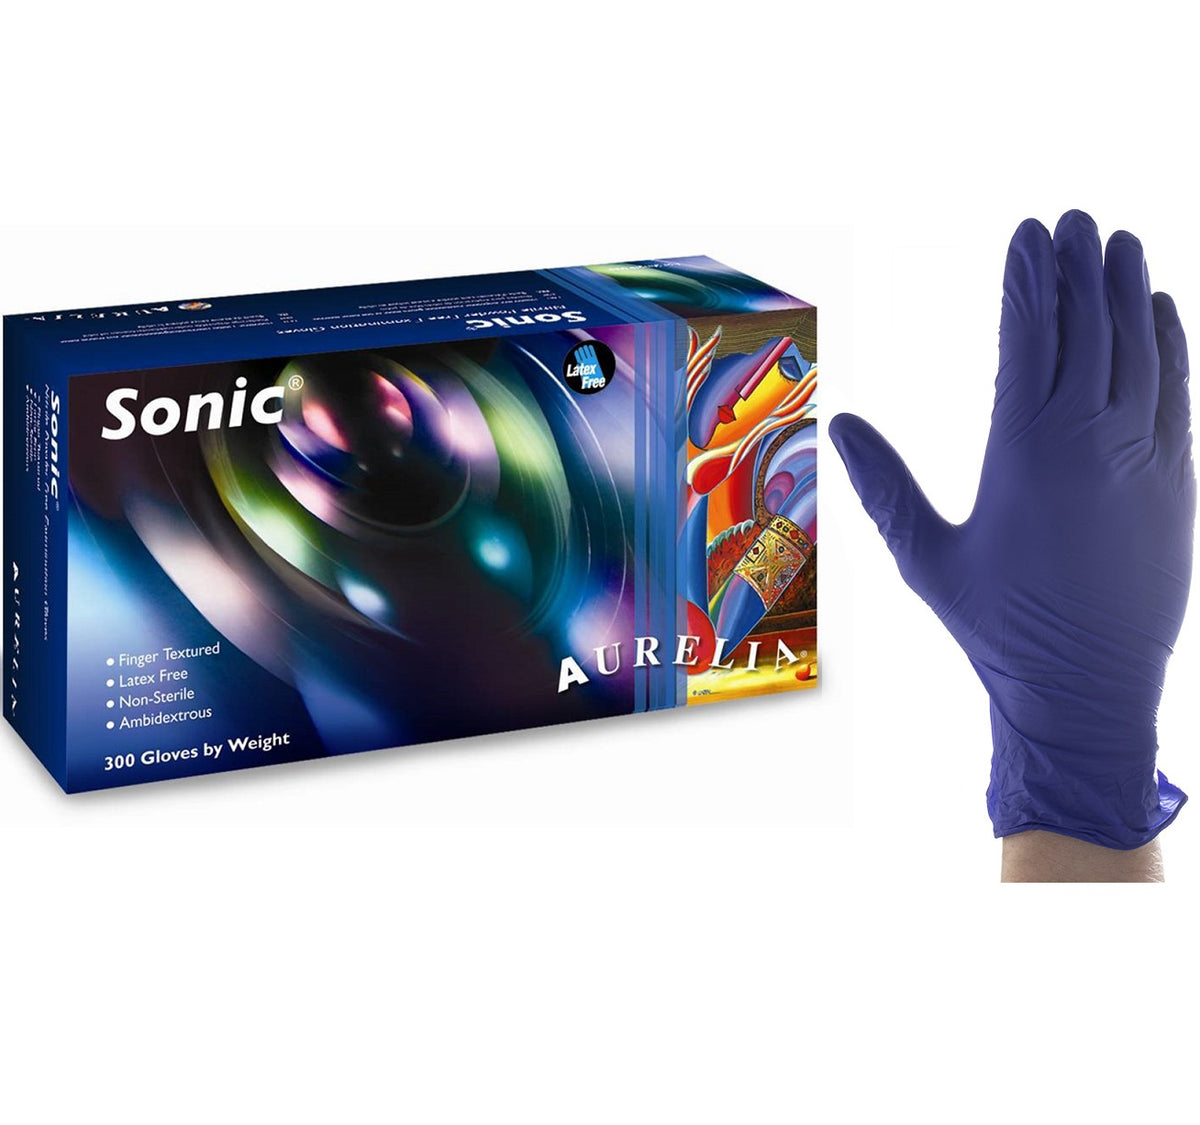 Antwort auf @honestly_aurelia, At first you have to take the gloves